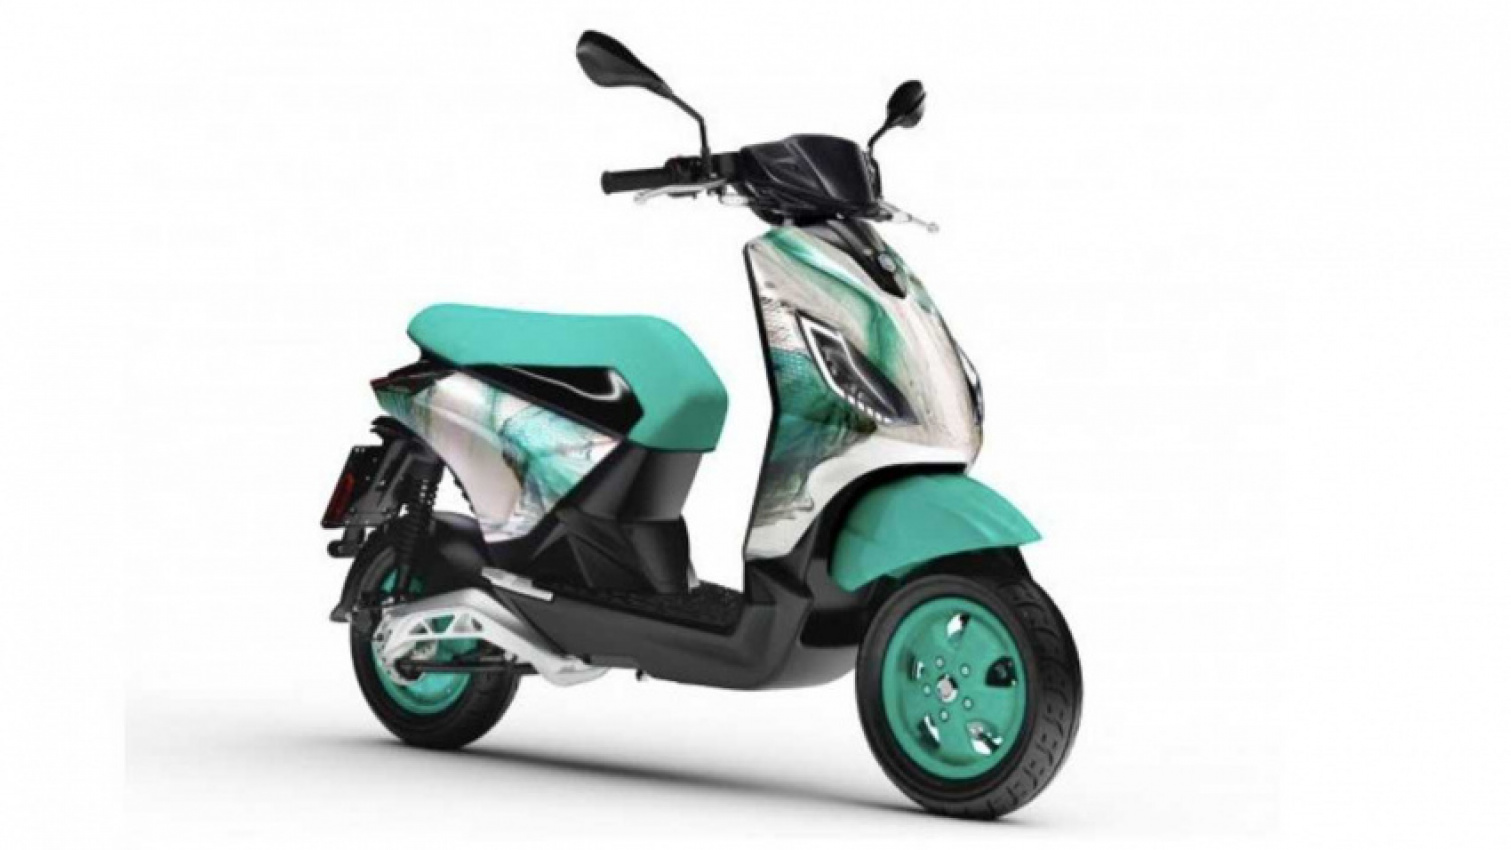 autos, cars, piaggio, piaggio 1 feng chen wang scooter expected to hit showrooms in april